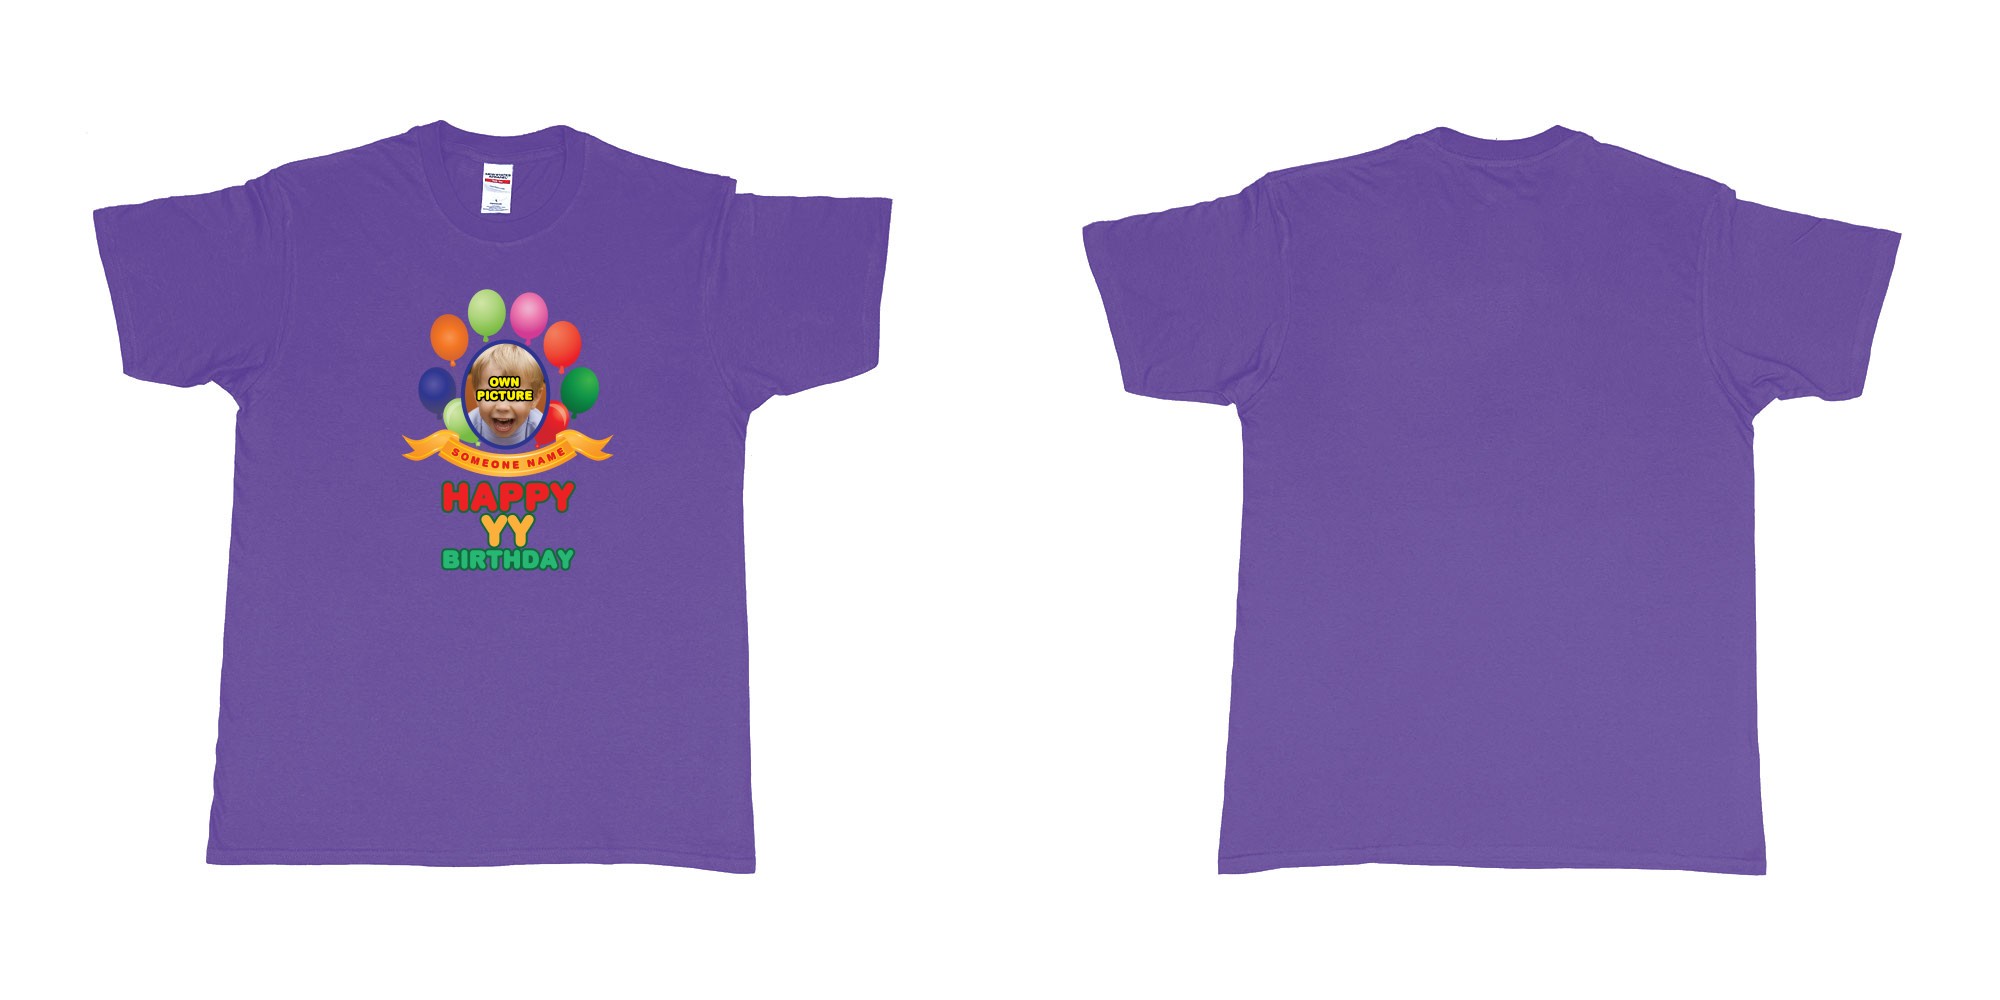 Custom tshirt design happy birthday balloon confetti custom name year t shirt printing bali in fabric color purple choice your own text made in Bali by The Pirate Way